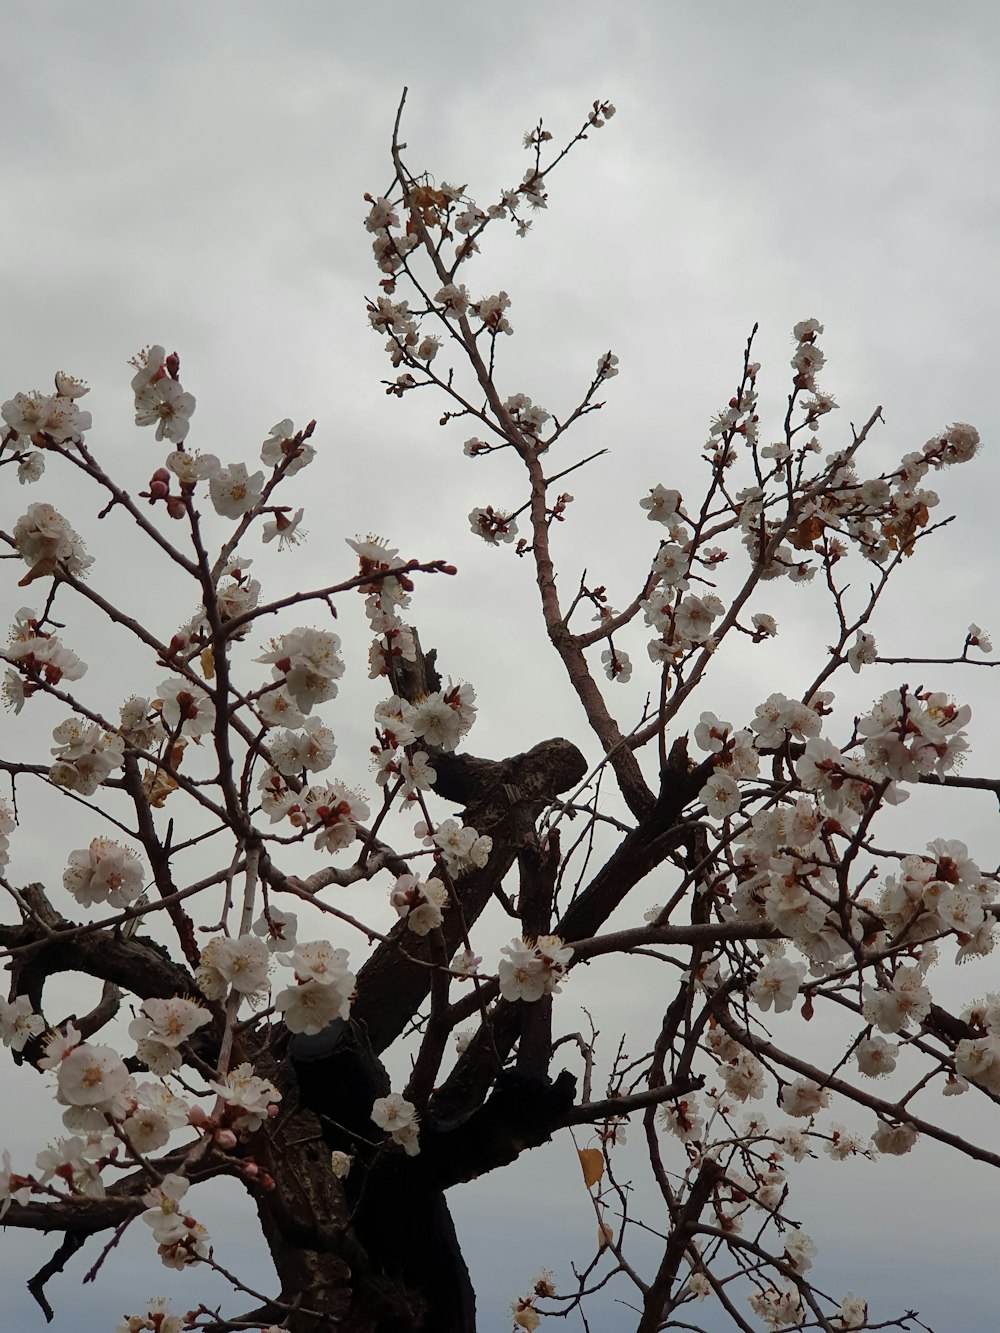 a bird is sitting in a tree with white flowers